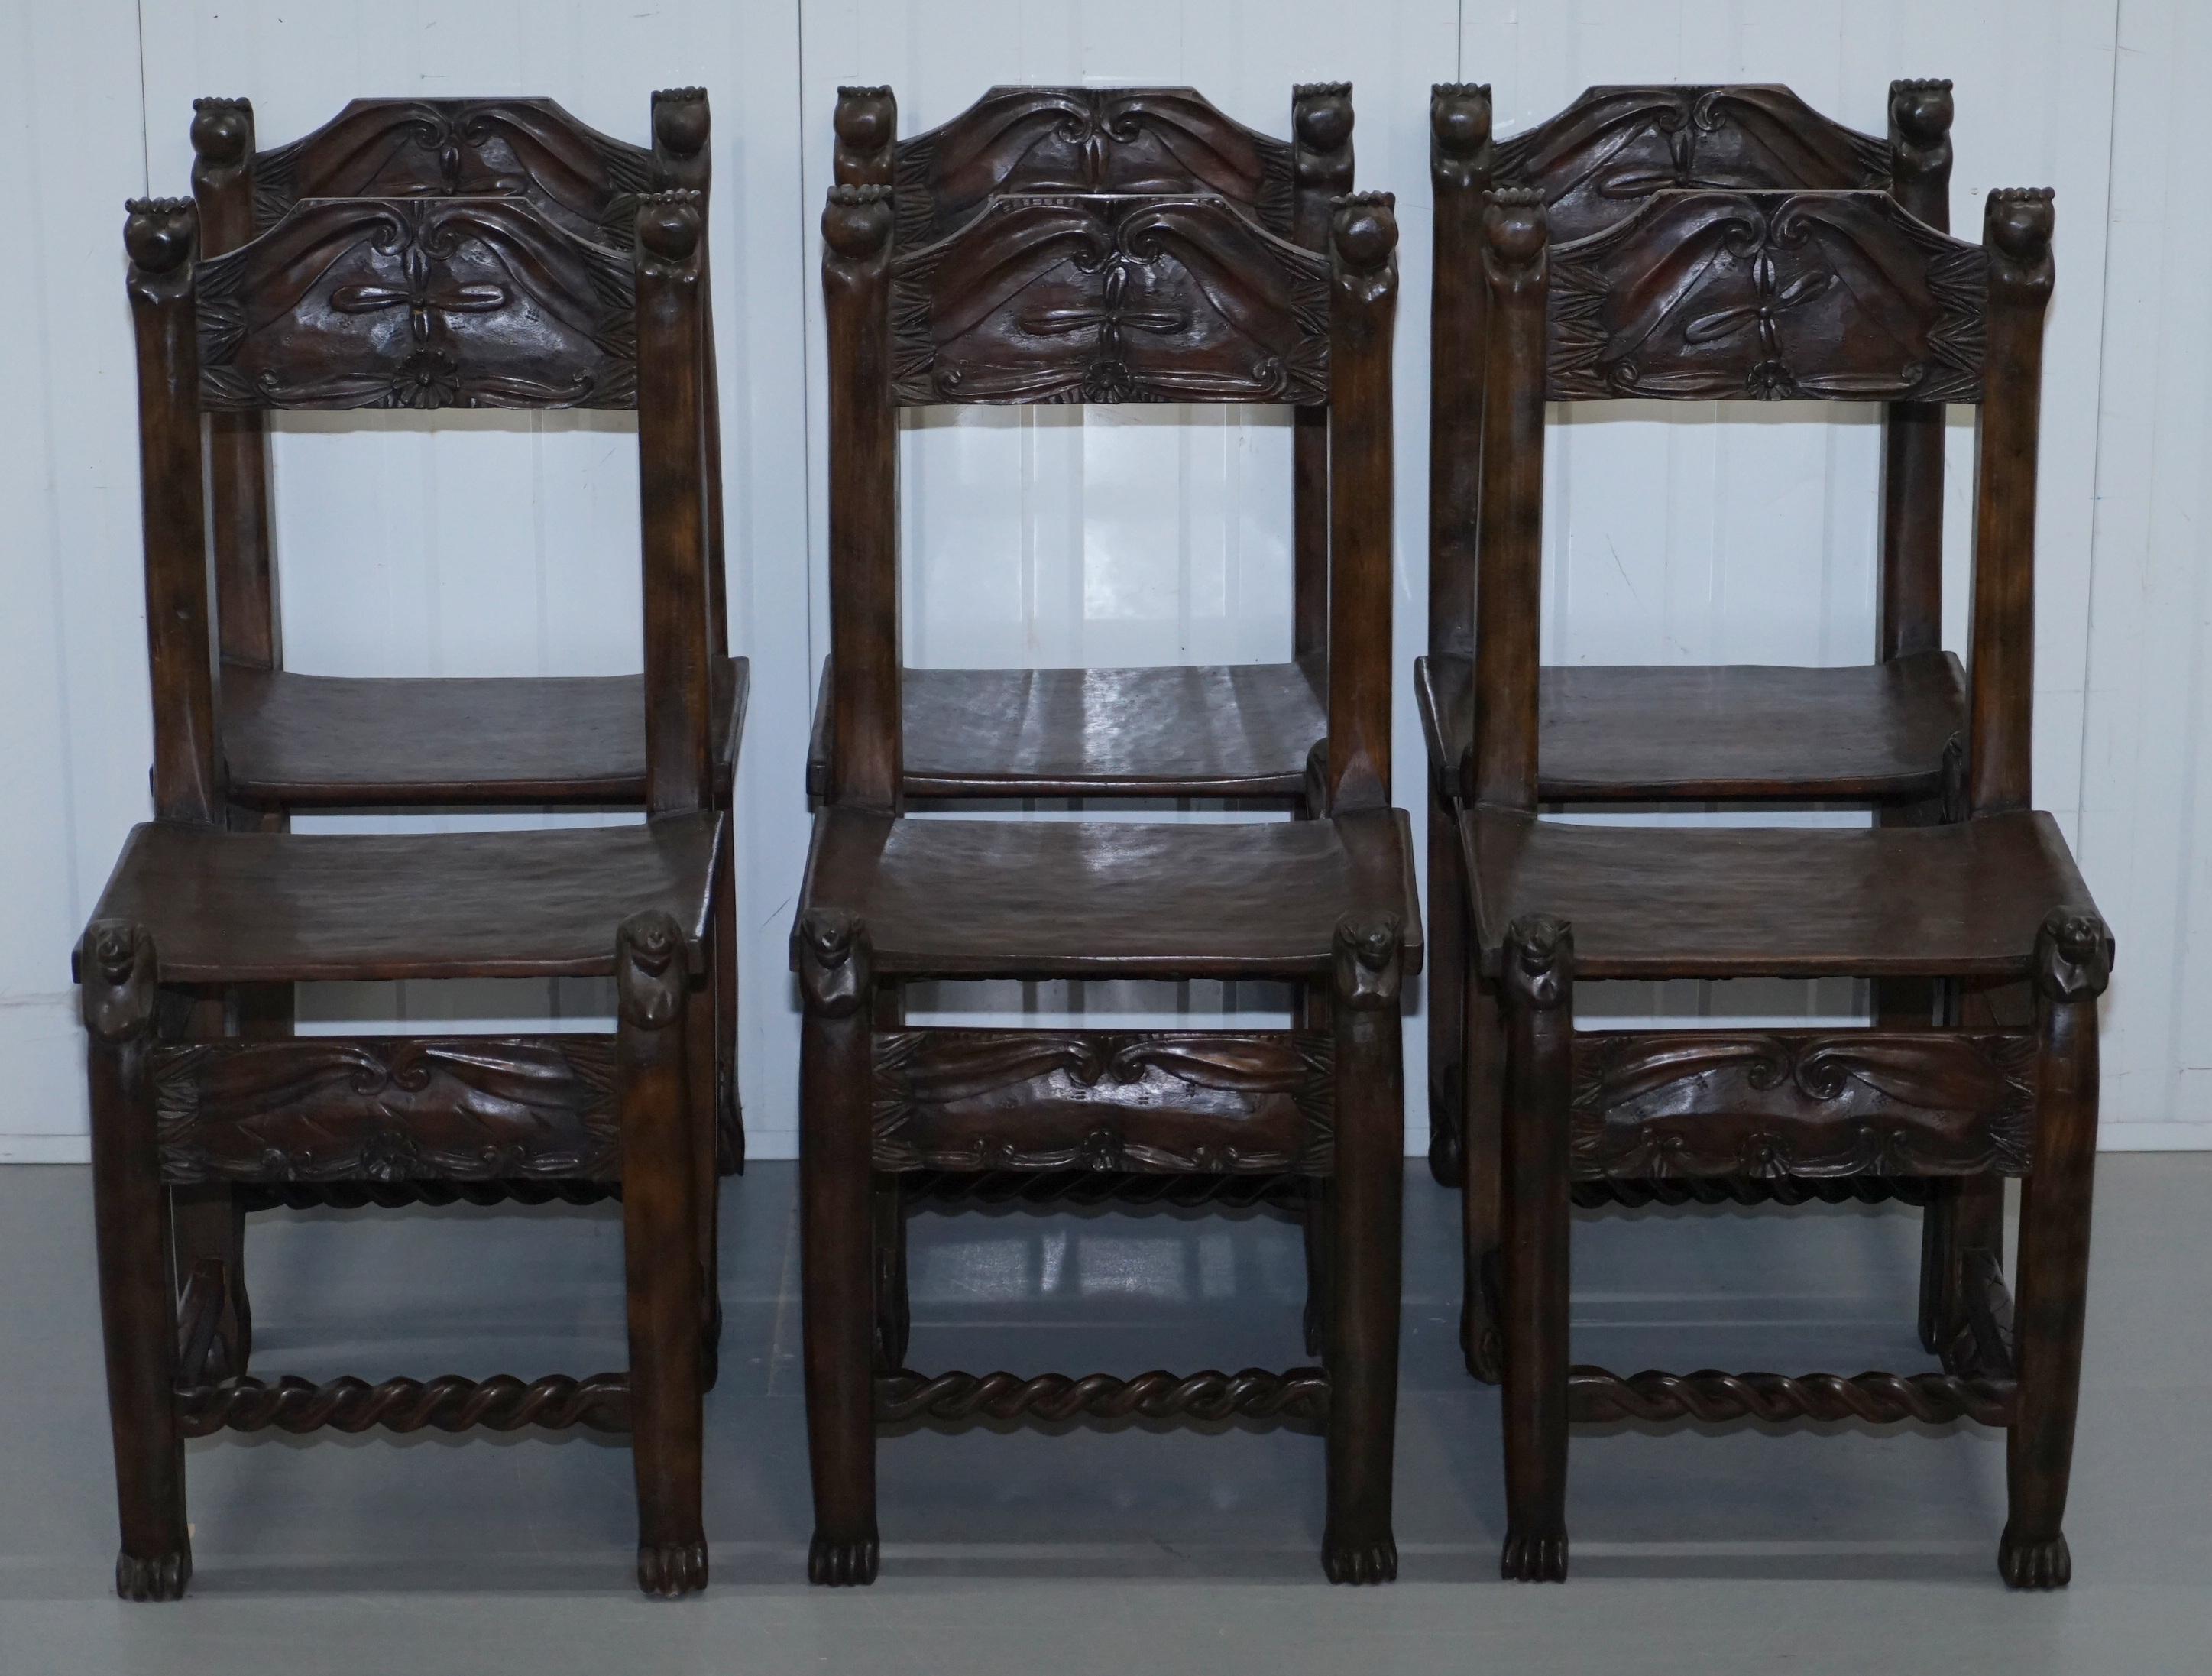 We are delighted to offer for sale this lovely set of six hand-carved wood dining chairs with hand and ball detailing and possibly Lions heads 

A good looking and decorative set, the chair finials have hands holding balls, the seat tops are